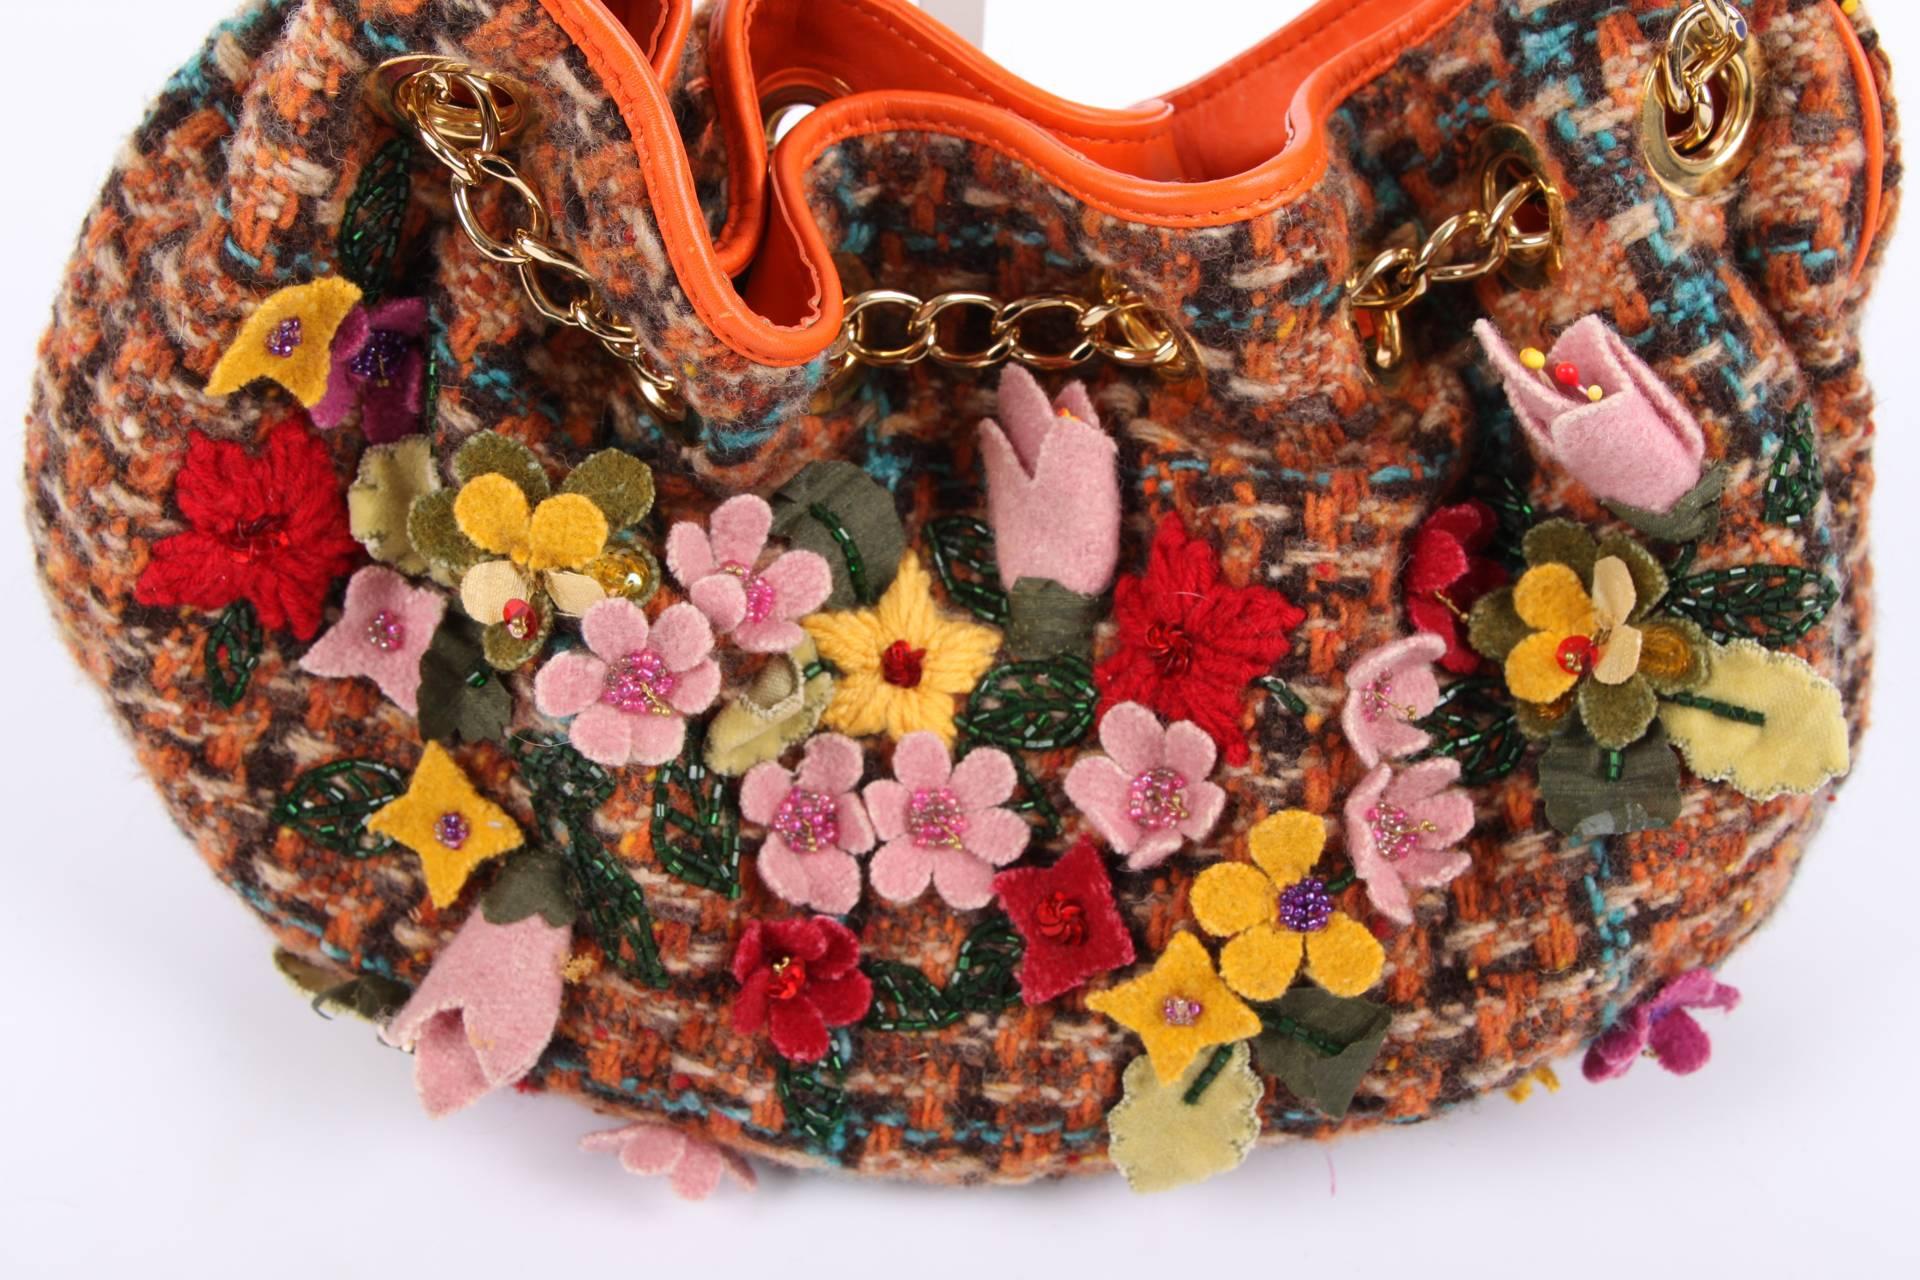 Very special bag by ETRO crafted in multi coloured boucle covered with flowers and beads.

The handles are executed in orange and brown leather, gold-tone hardware. Magnetic snap button closure on top, fully lined with shiny green fabric. On flat